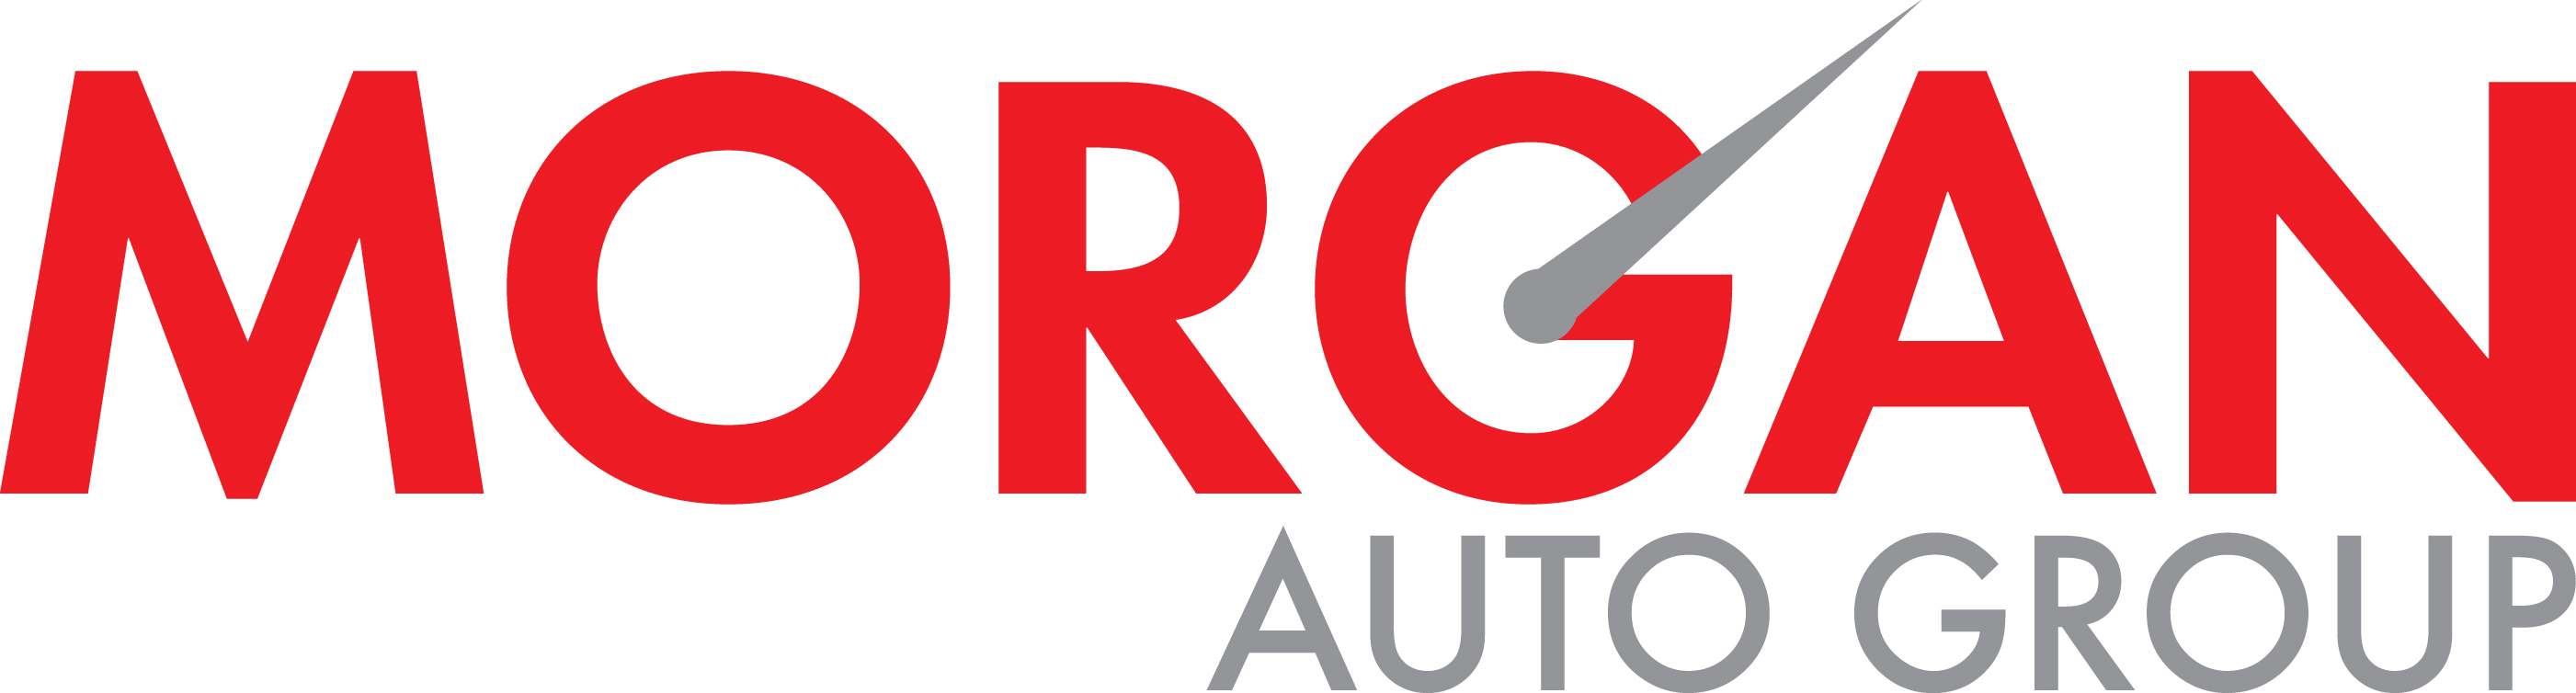 Morgan Auto Group hires Pamela Prue as Chief Learning Officer